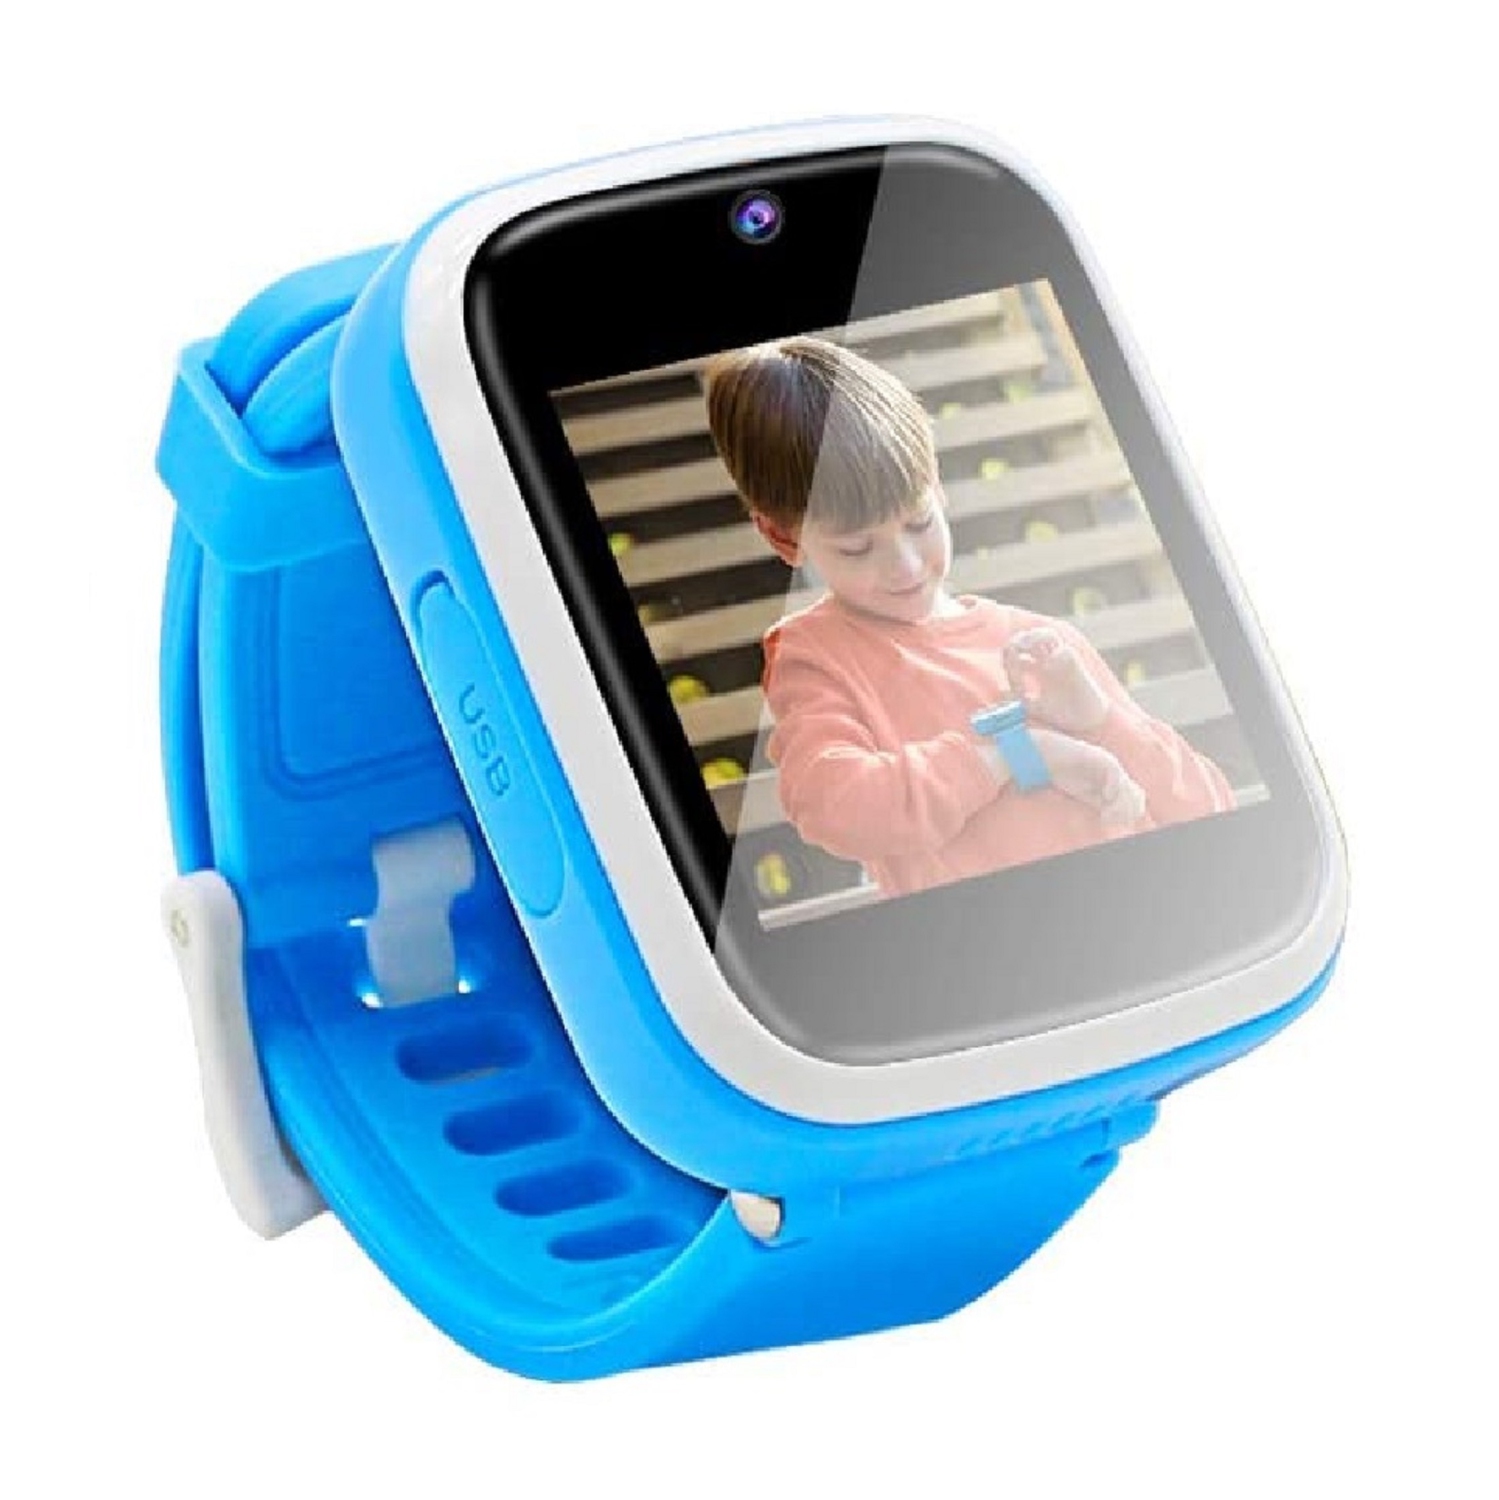 ULTREND Techie-Kidz Dual Camera touch Screen Smartwatch for Kids with Music player, Torch, Games & Activities